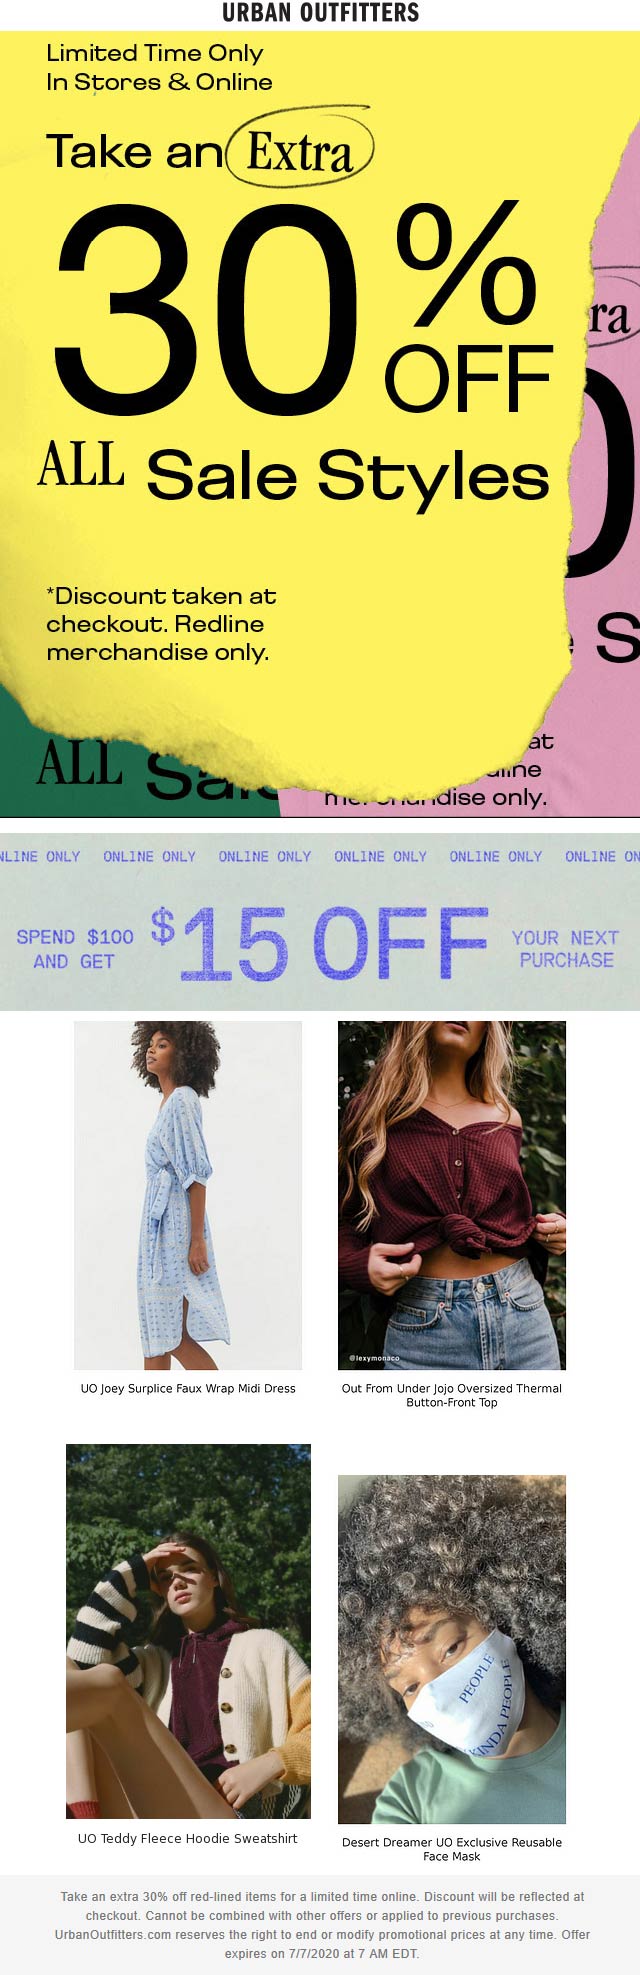 Urban Outfitters stores Coupon  Extra 30% off sale items & more at Urban Outfitters, ditto online #urbanoutfitters